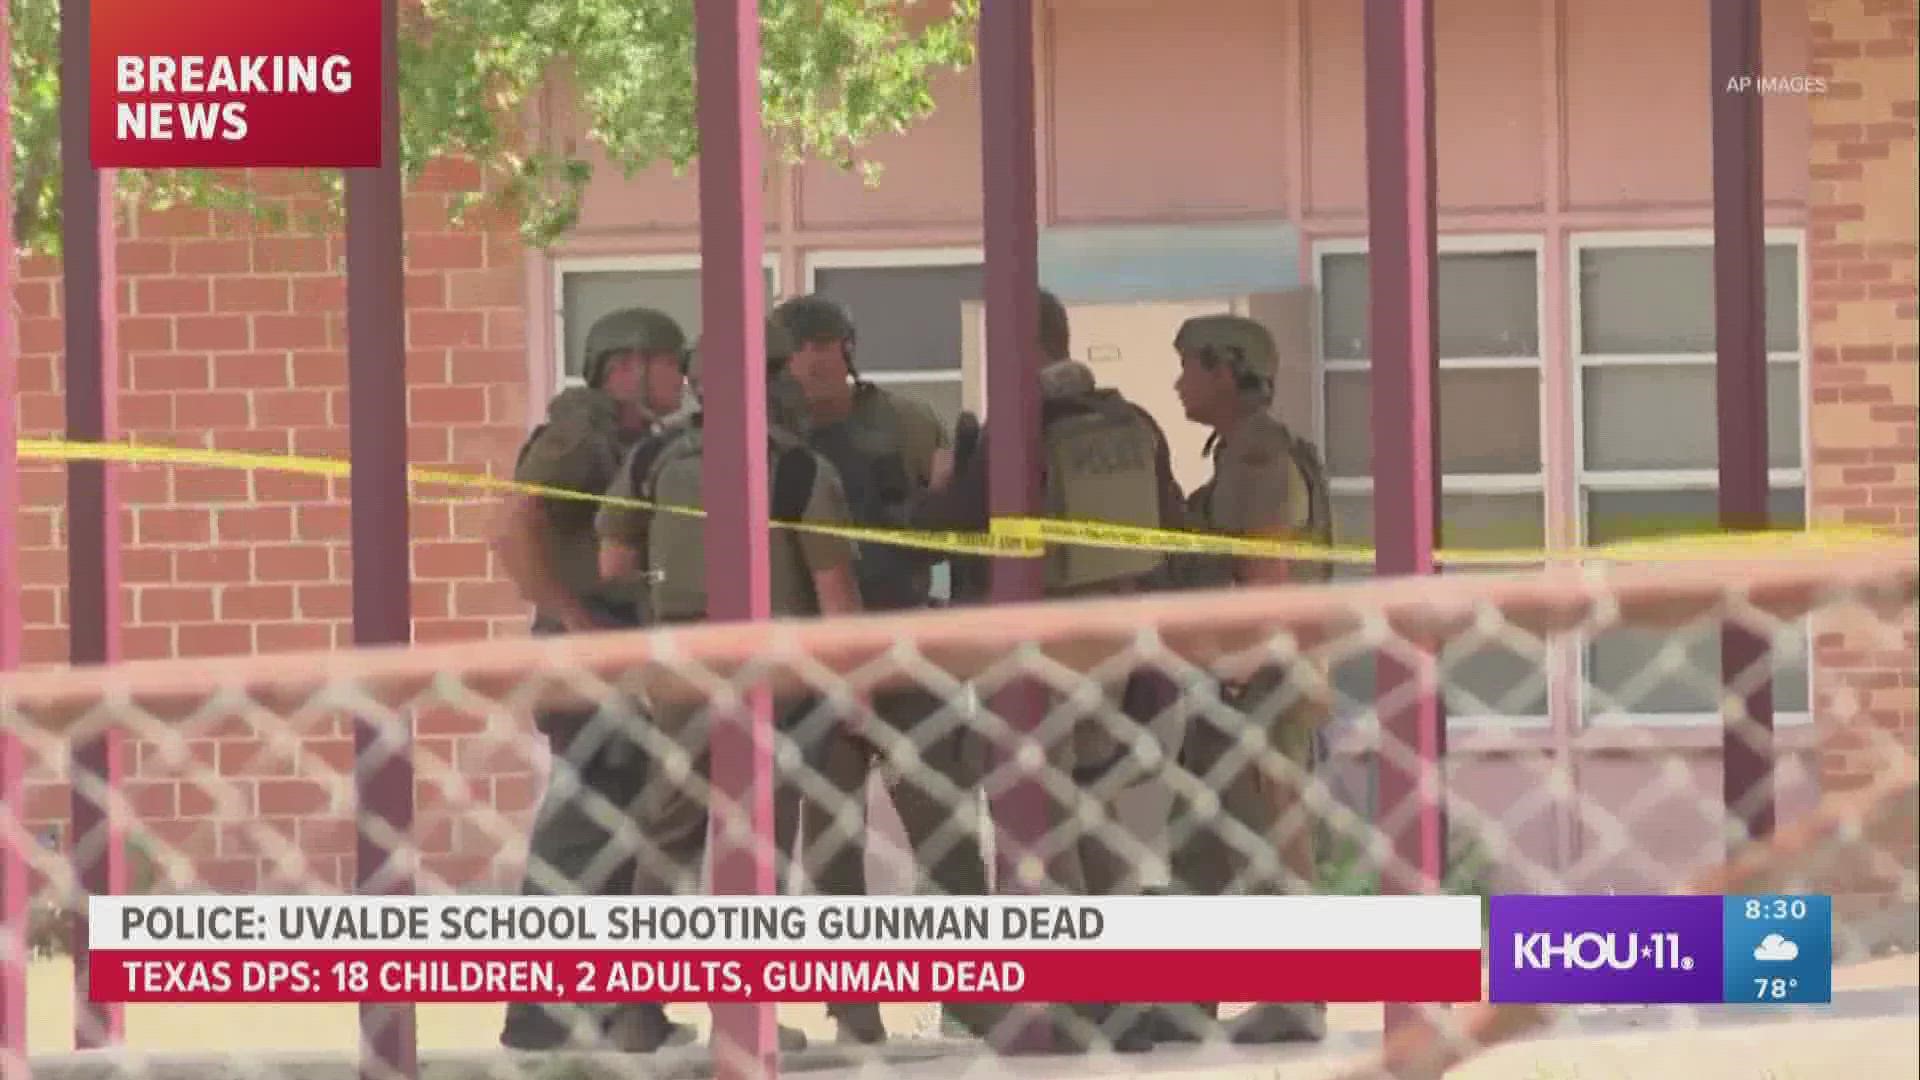 Authorities said 21 people were killed in the shooting at Robb Elementary School. The gunman, identified as Salvador Ramos, 18, was killed by responding officers.